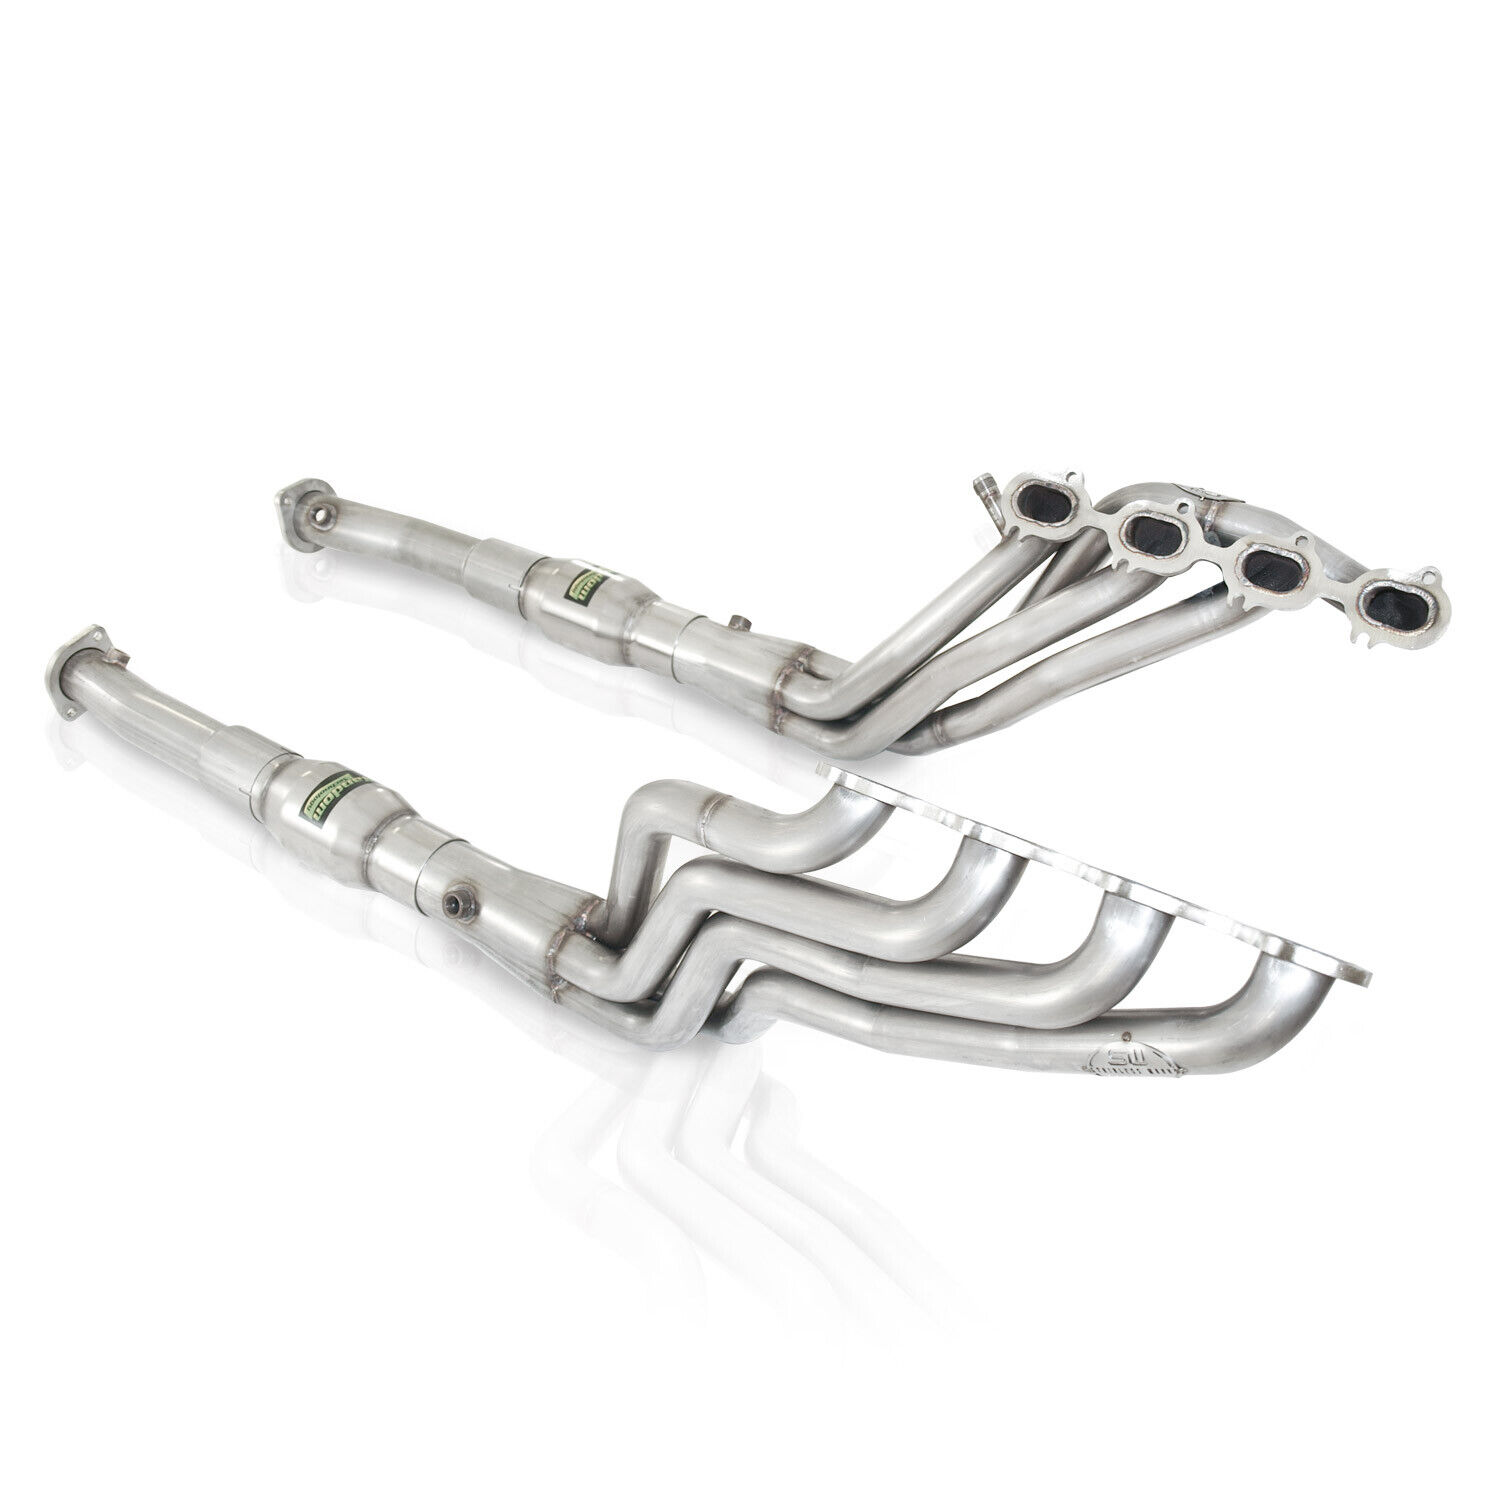 Stainless Works MAUCAT Mercury Marauder 2003-2004 Headers Catted Leads